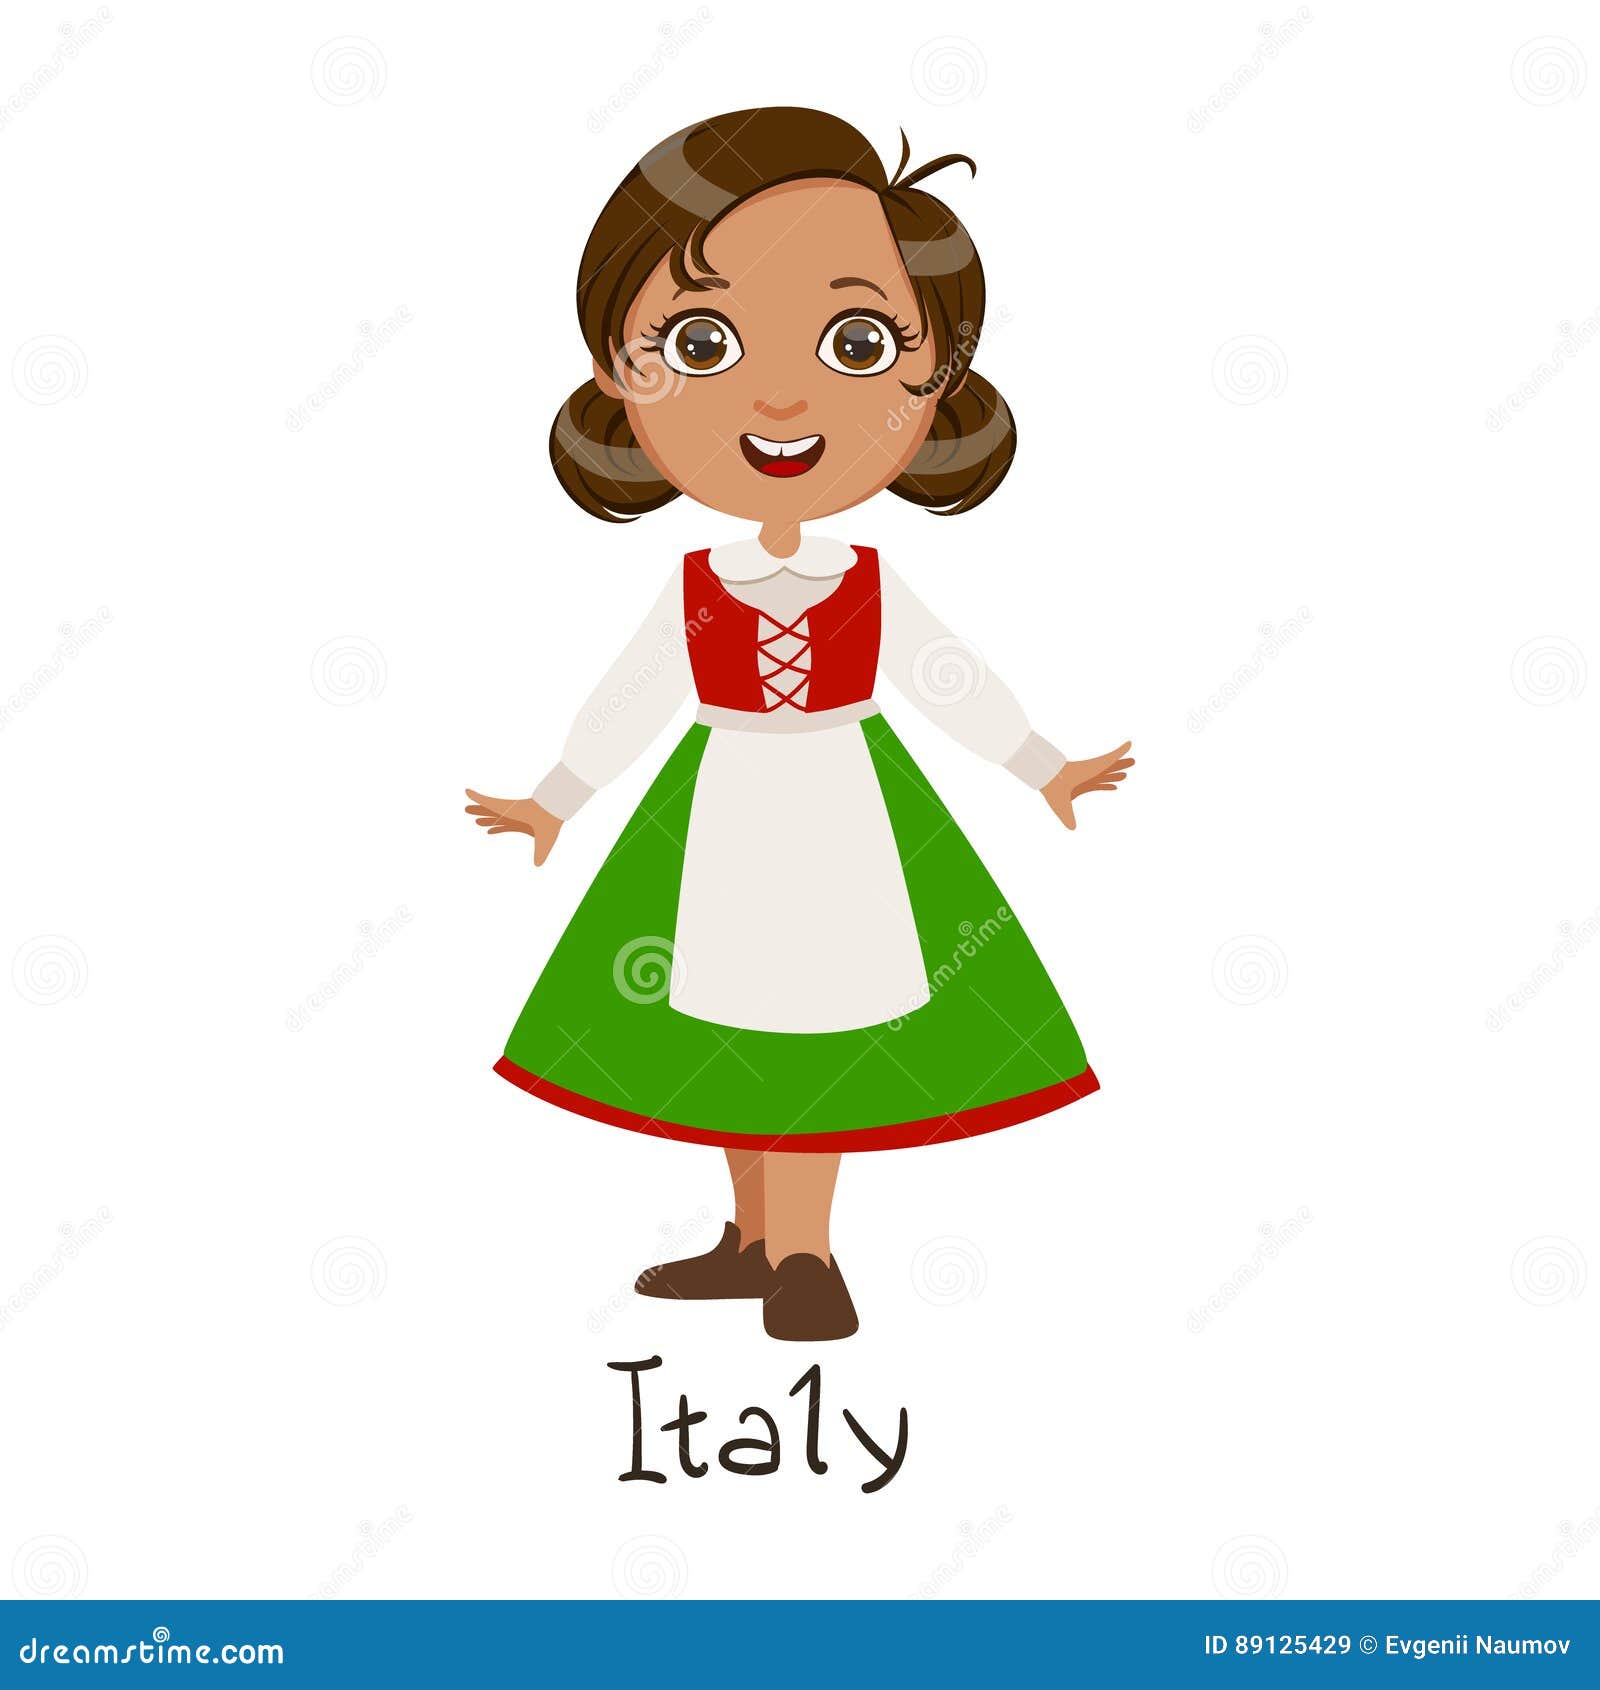 Girl in Italy Country National Clothes, Wearing Green Skirt and